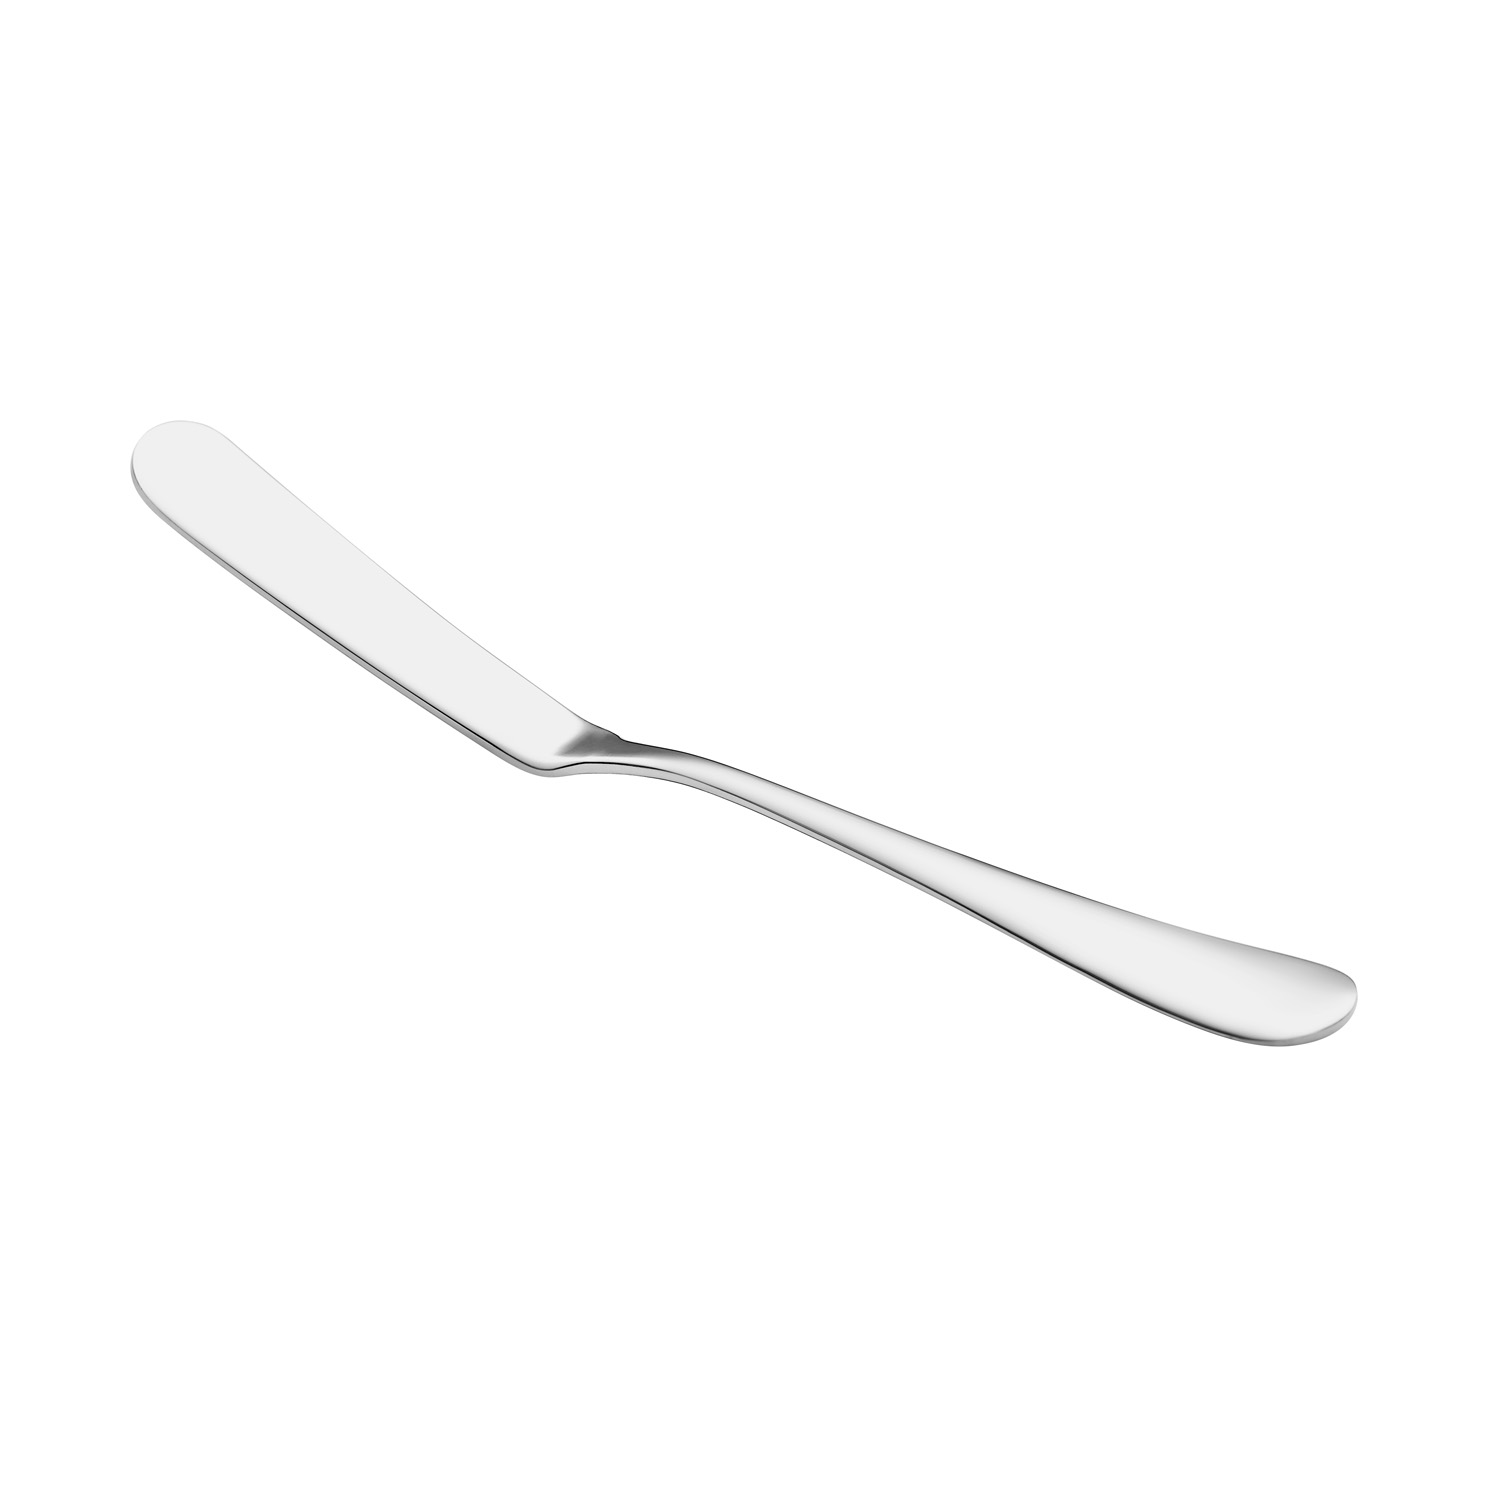 CAC China 8003-12 Noble Butter Spreader, Extra Heavyweight 18/8, 6 3/4"